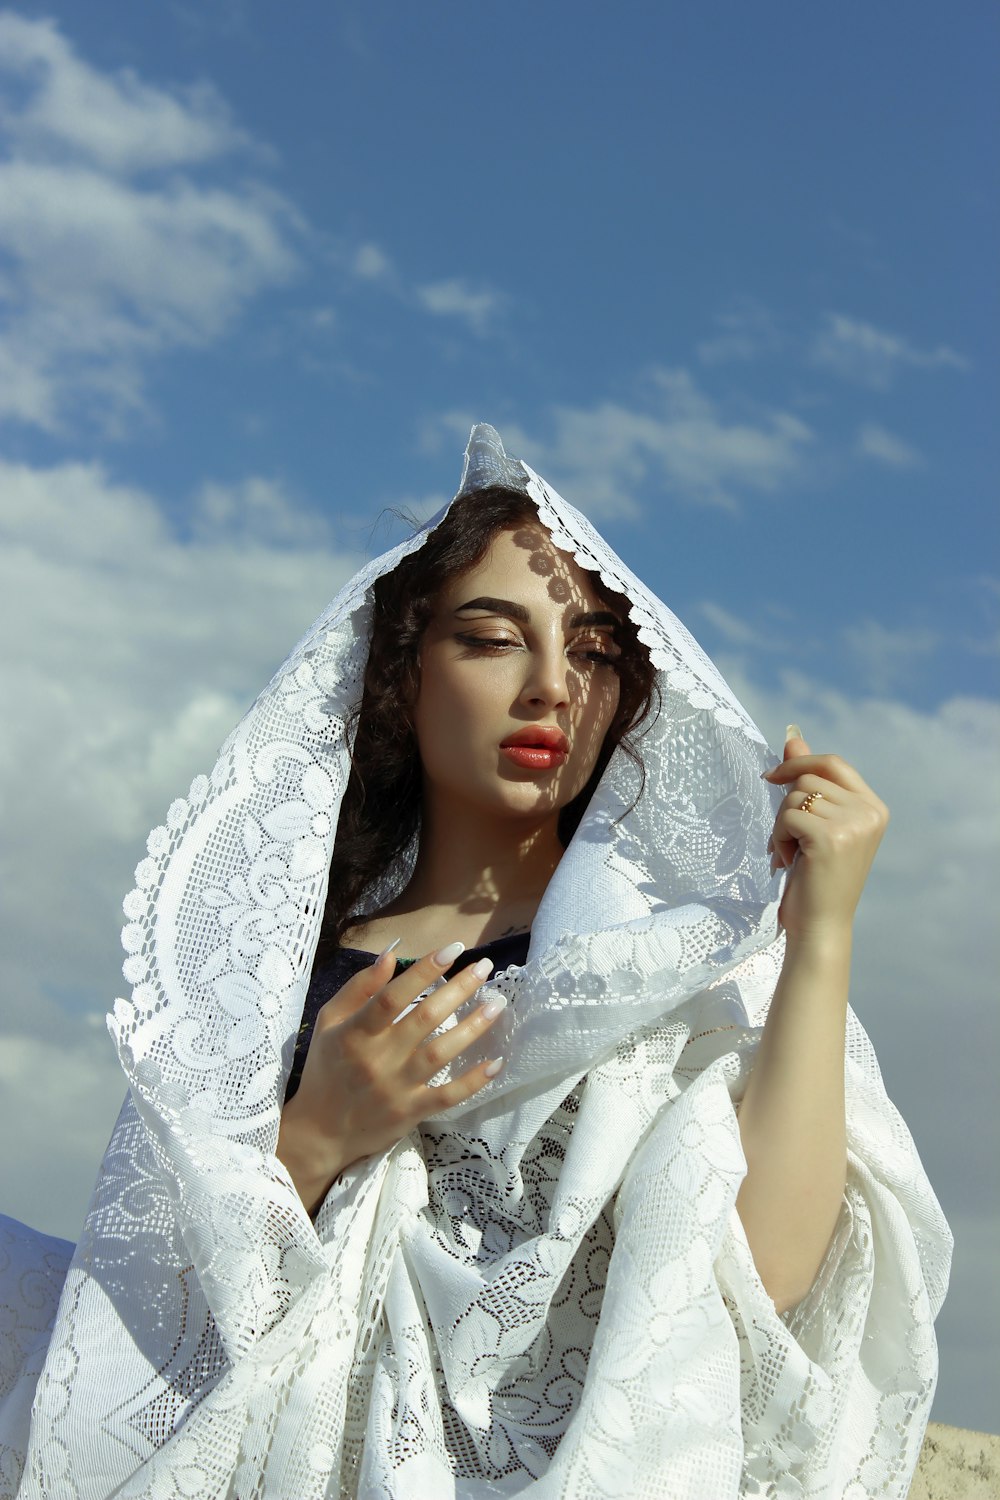 a woman wearing a white shawl and holding a cigarette